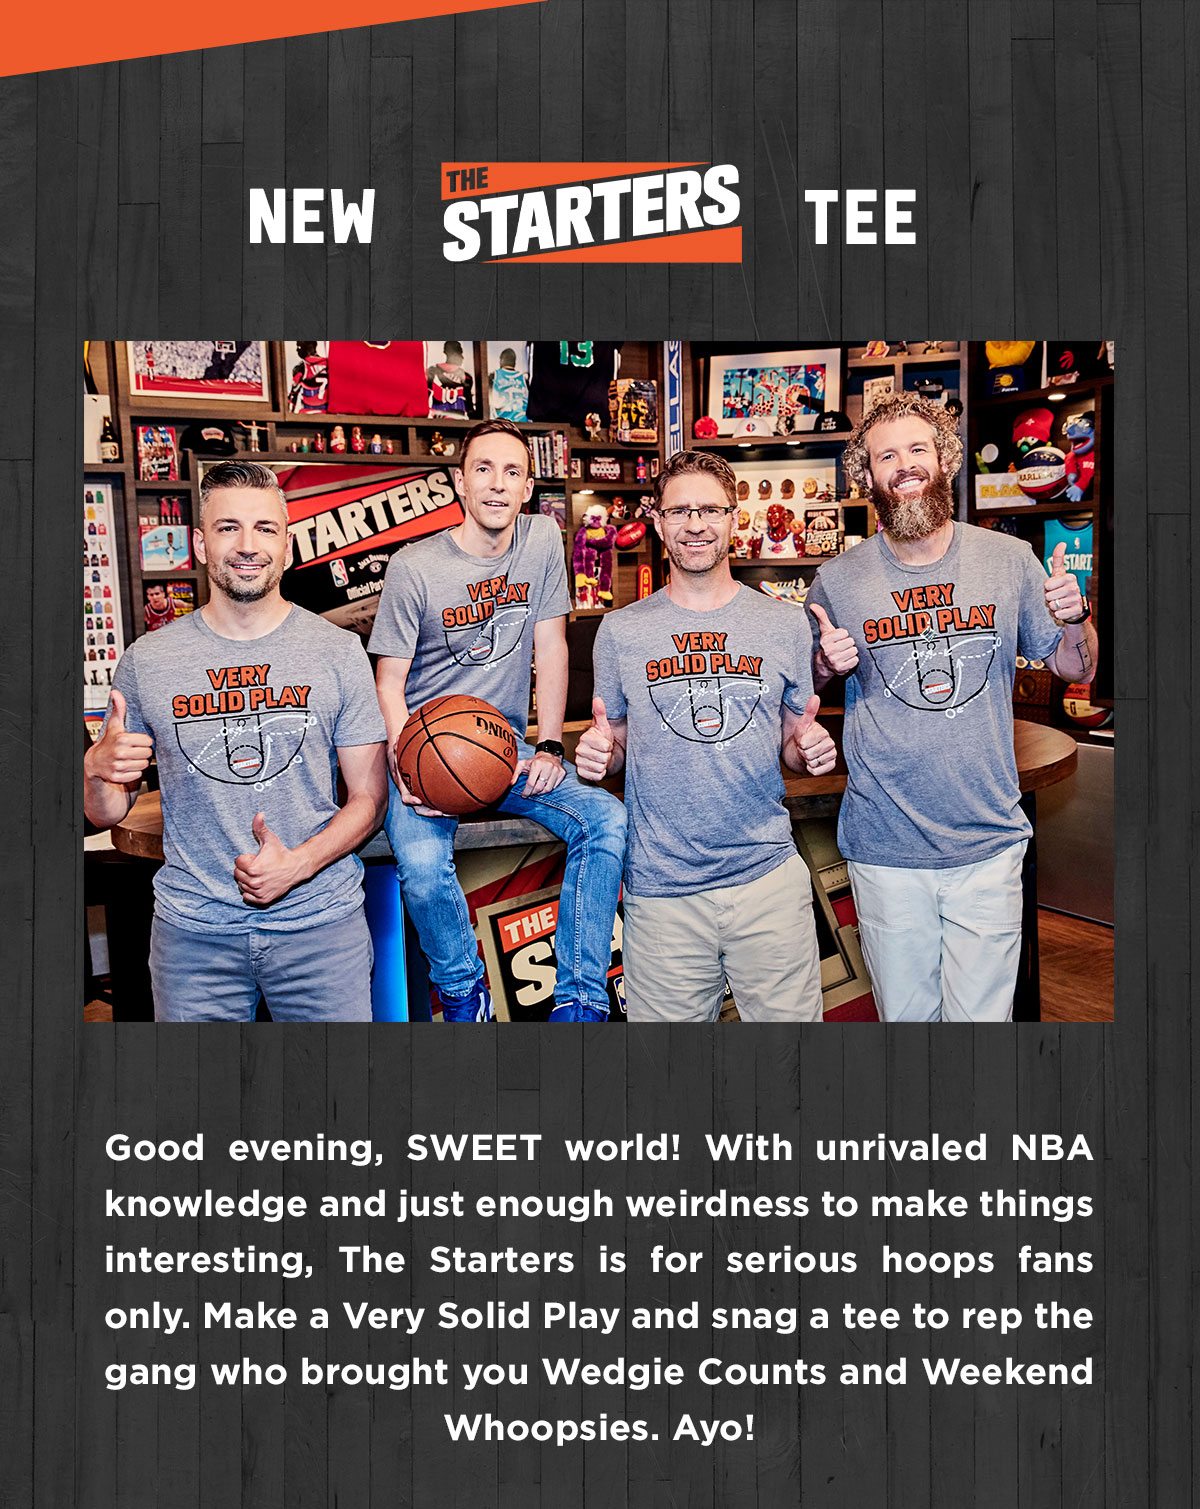 Good evening, SWEET world! With unrivaled NBA knowledge and just enough weirdness to make things interesting, The Starters is for serious hoops fans only. Make a Very Solid Play and snag a tee to rep the gang who brought you Wedgie Counts and Weekend Whoopsies. Ayo!